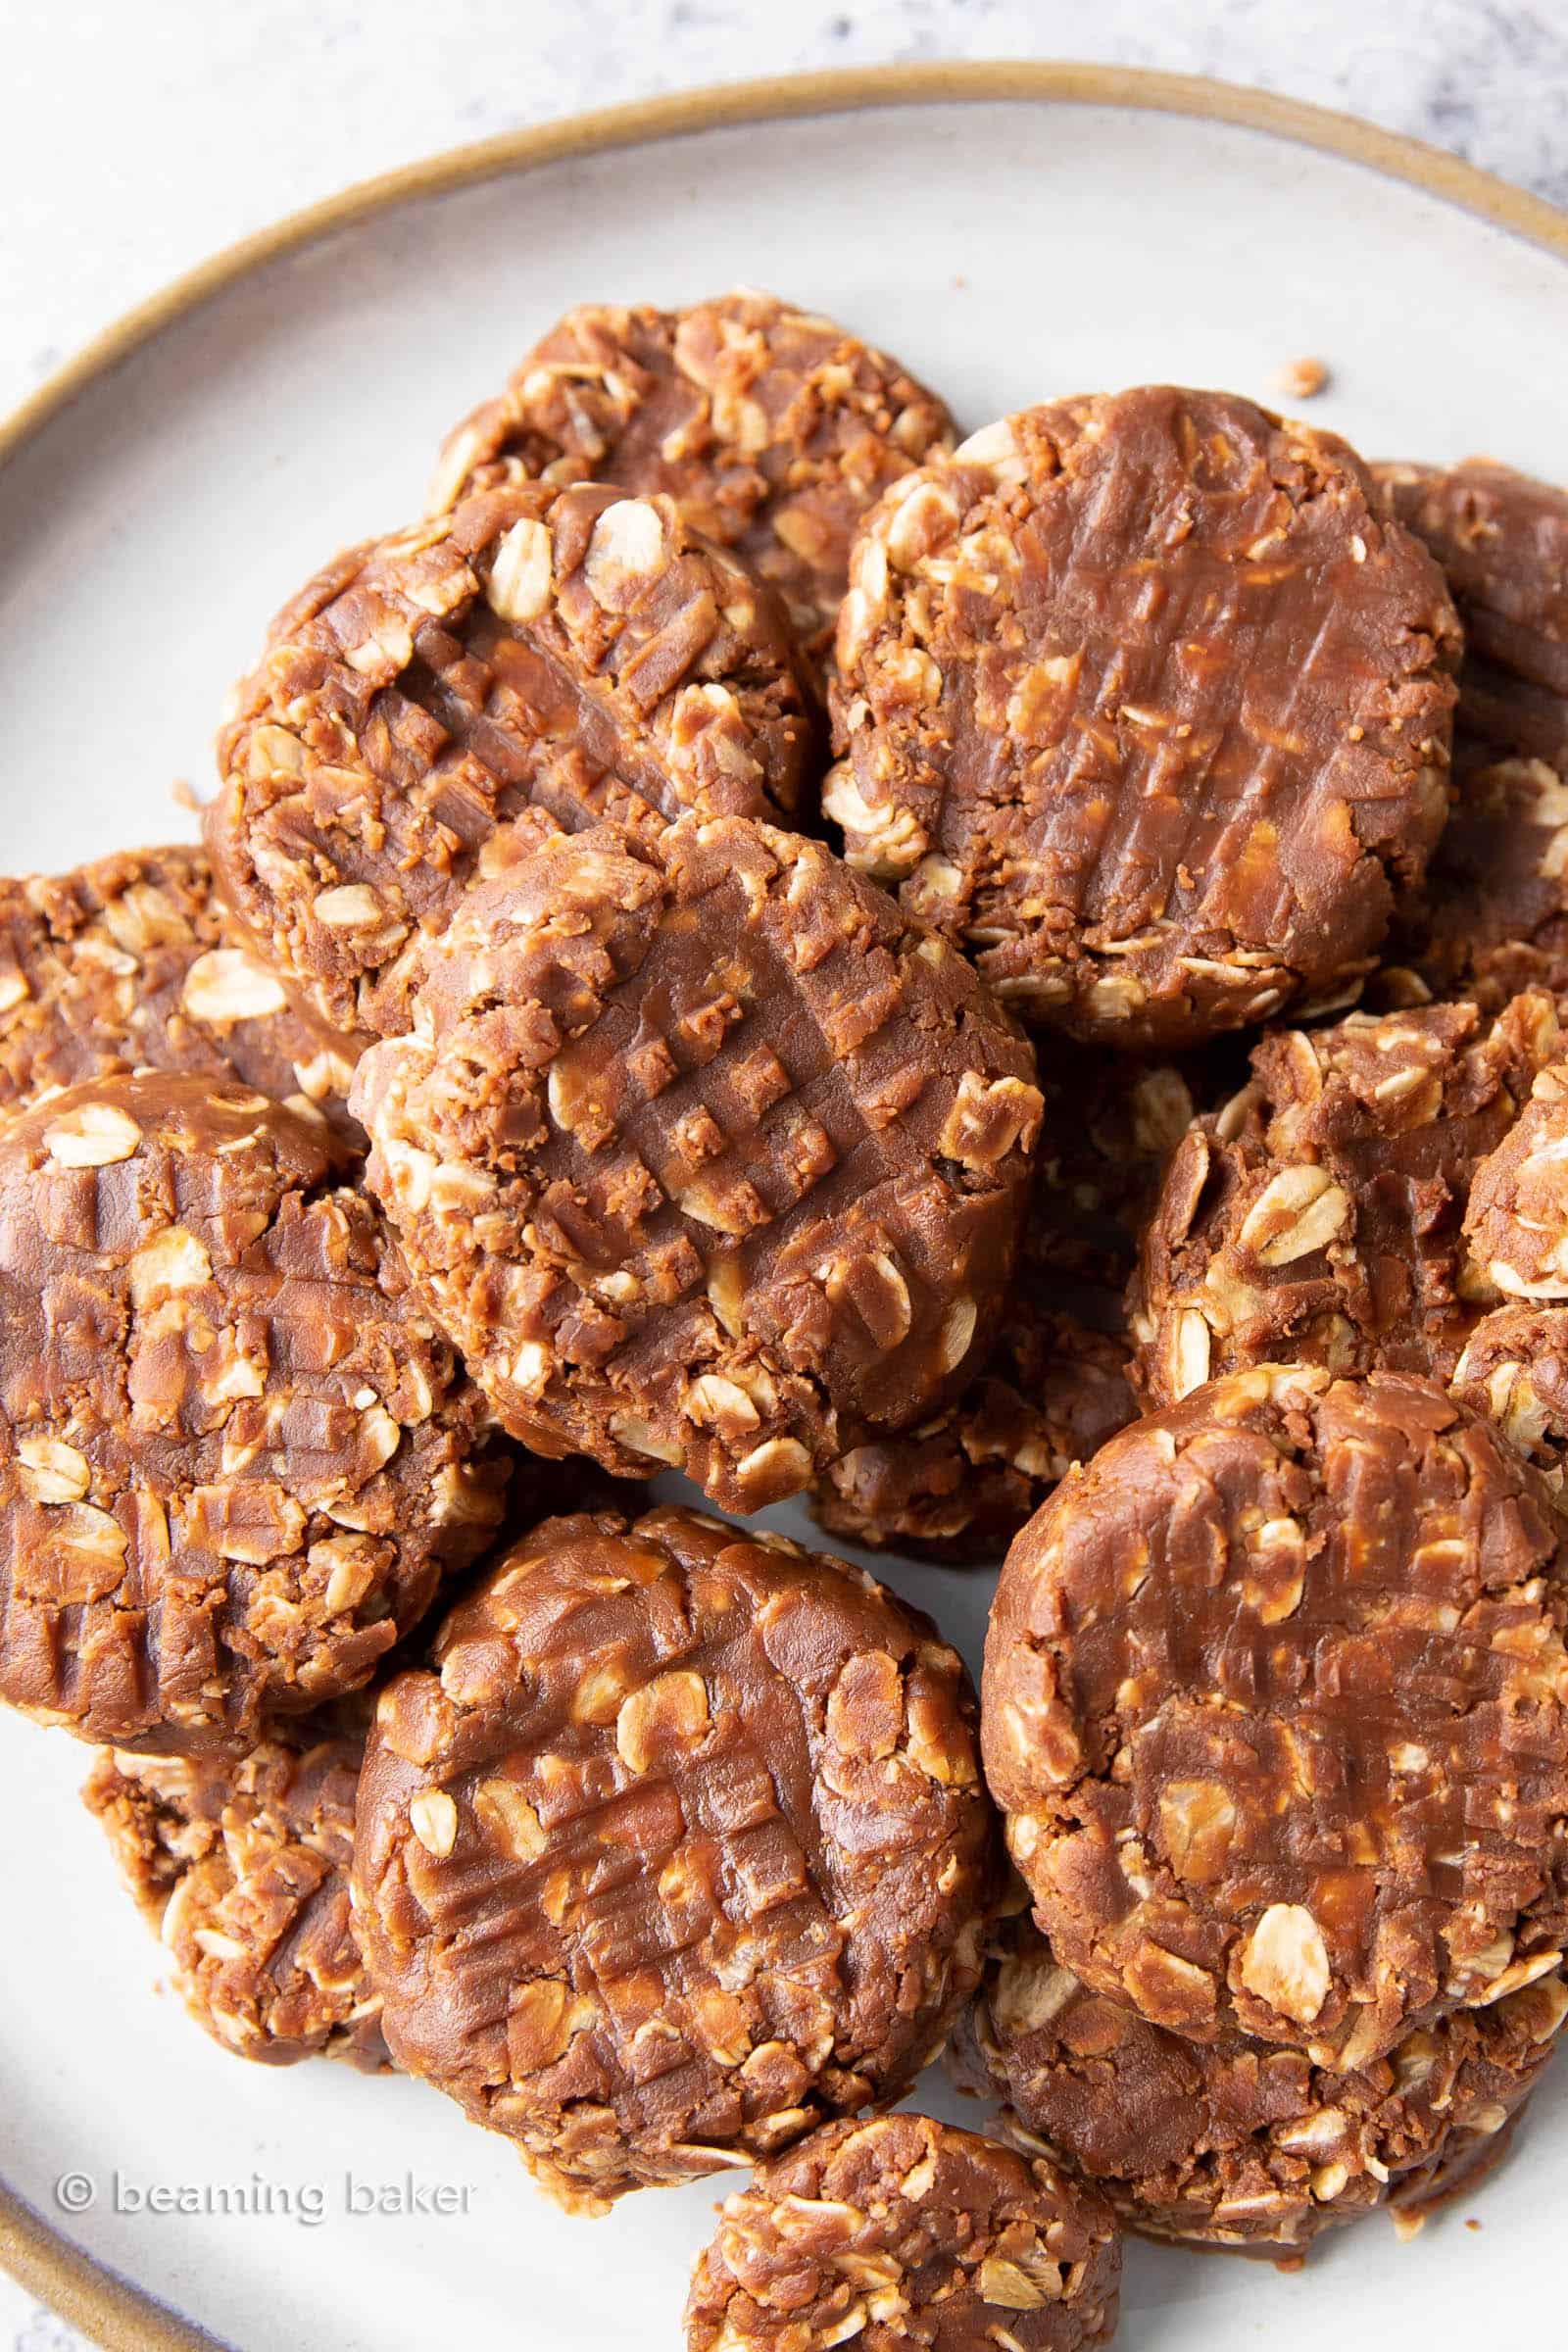 Simple & Easy No Bake Chocolate Oatmeal Cookies: just 4 ingredients for soft & chewy no bake cookies prepared in minutes! Delicious, Healthy and Easy! #NoBake #Oatmeal #Cookies #Chocolate | Recipe at BeamingBaker.com